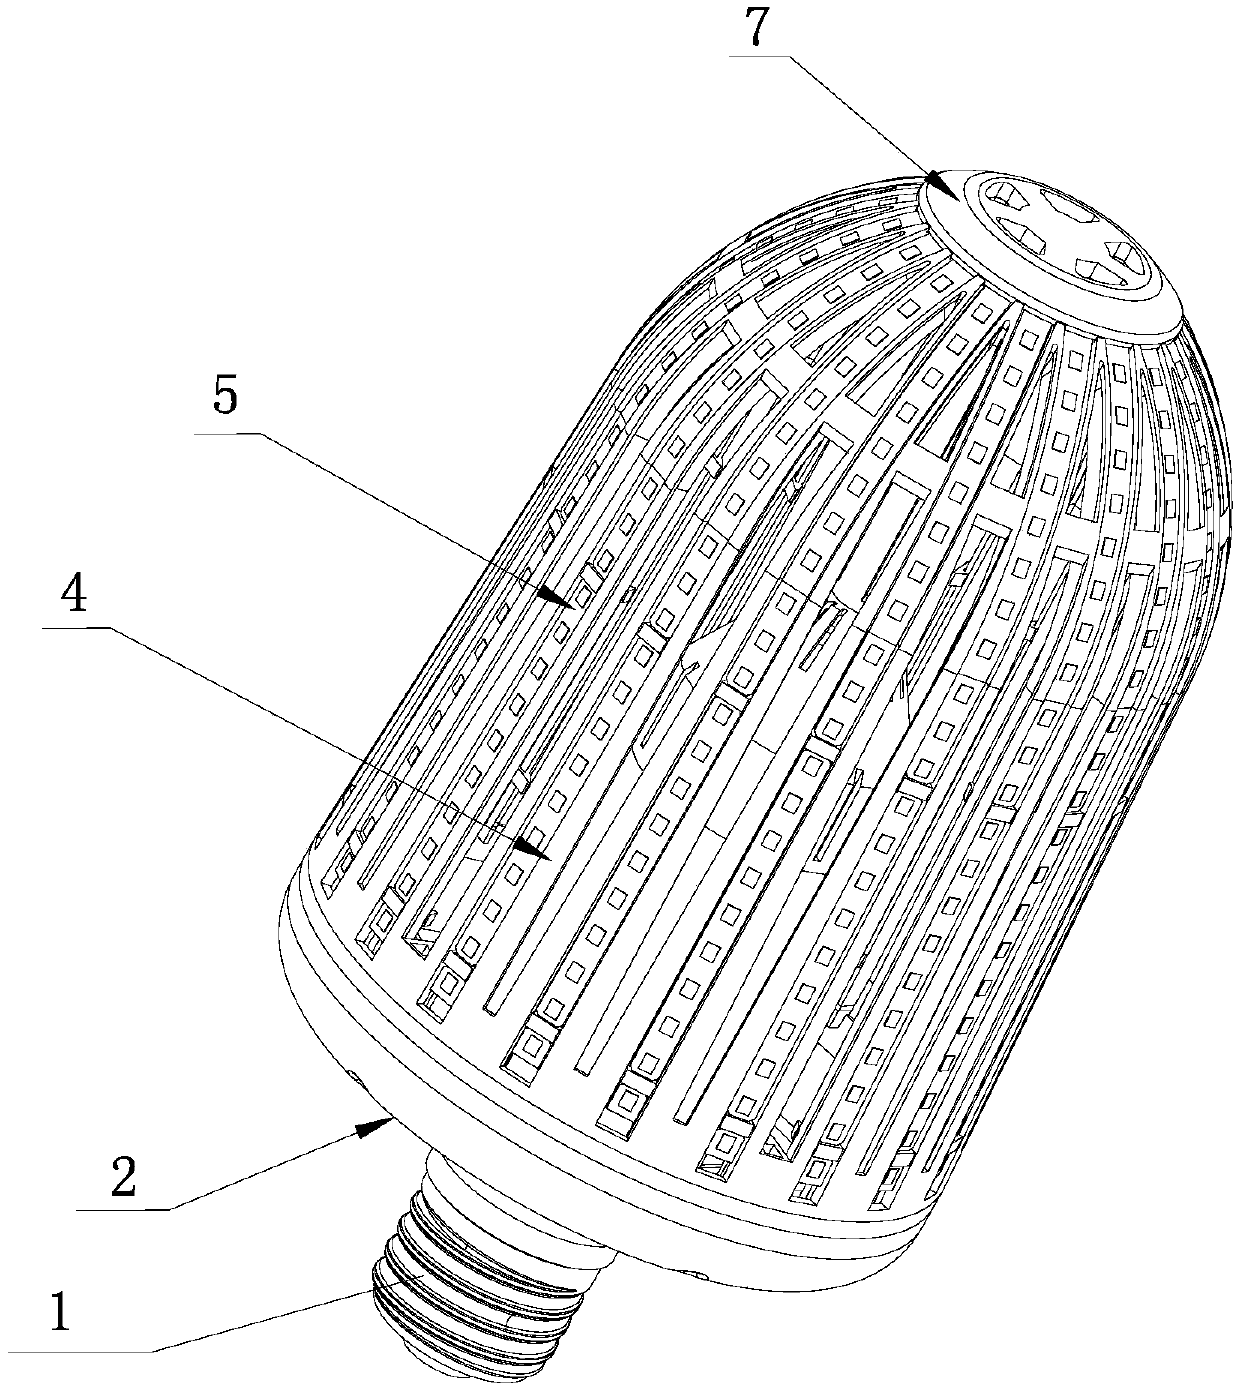 High-power LED lamp low in cost and capable of easily radiating heat